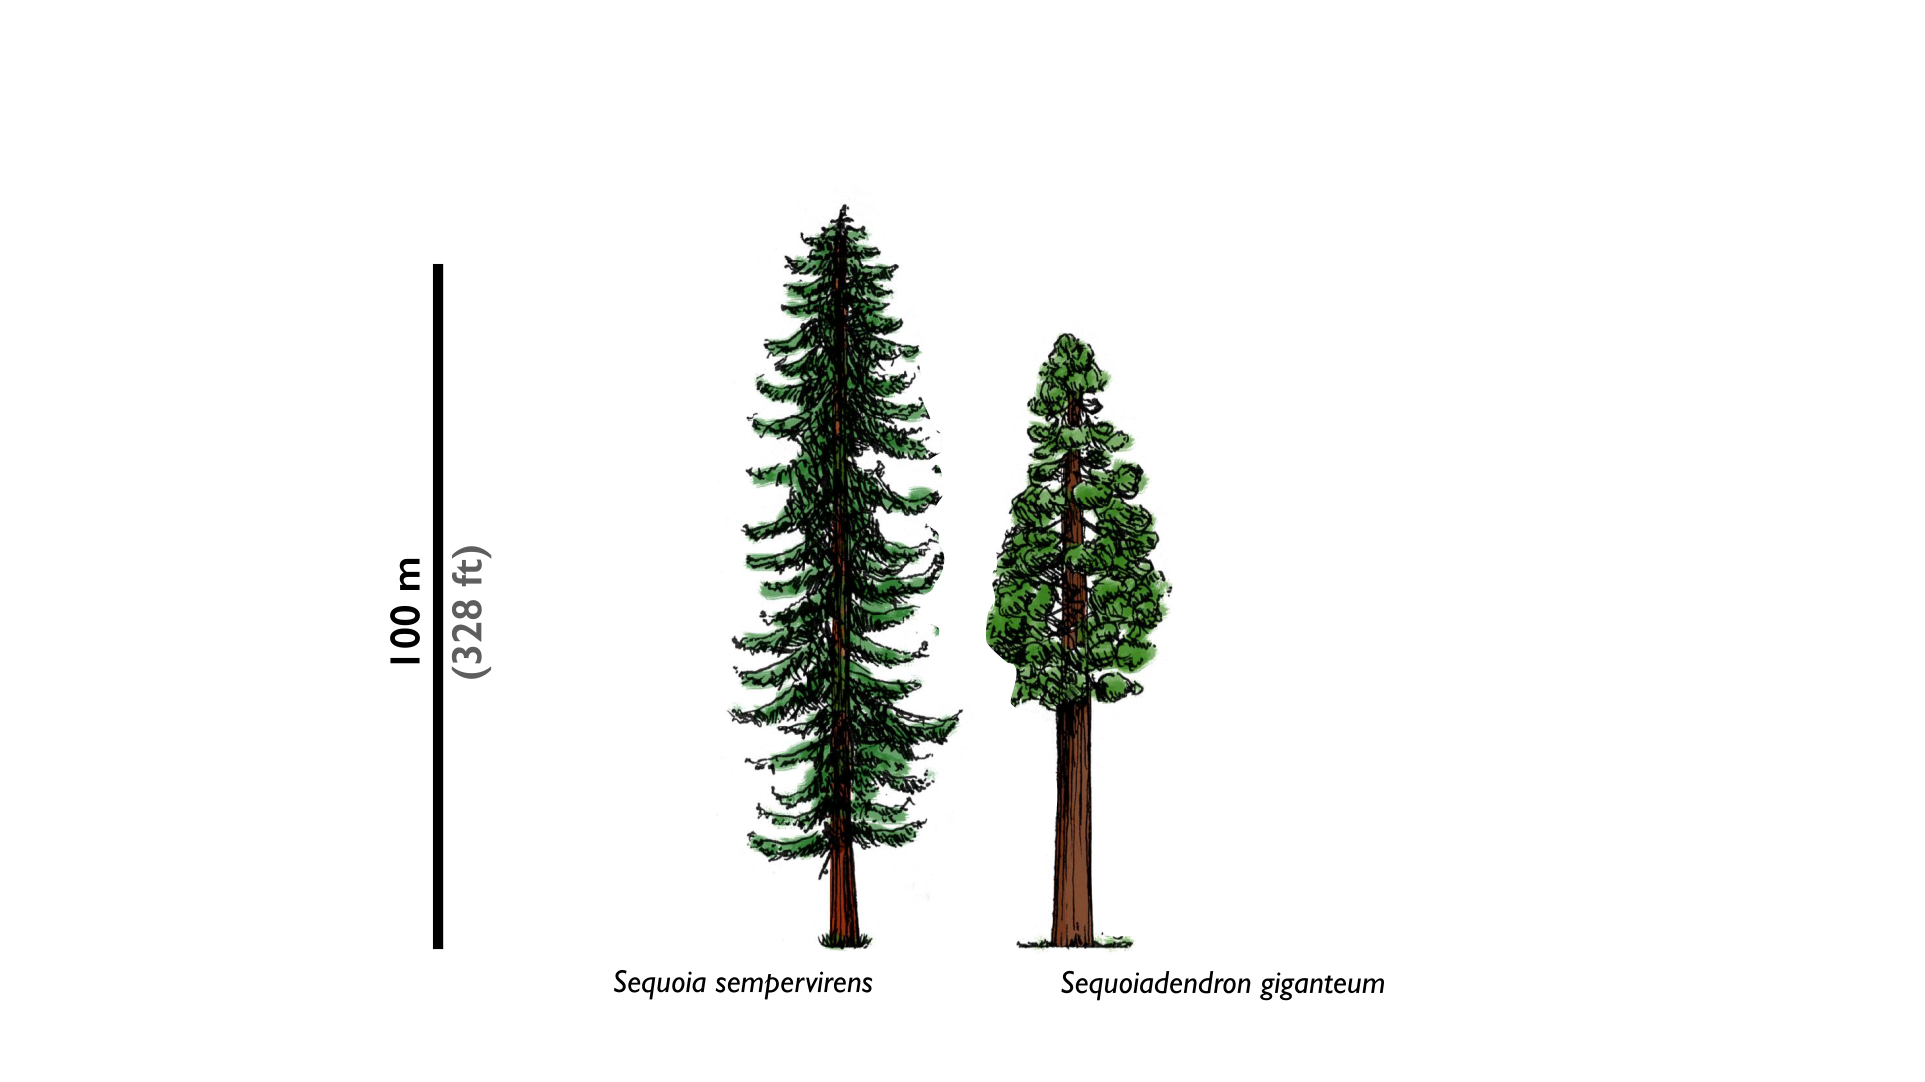 A drawing of California Redwood species, Sequoia sempervirens and Sequoiadendron giganteum